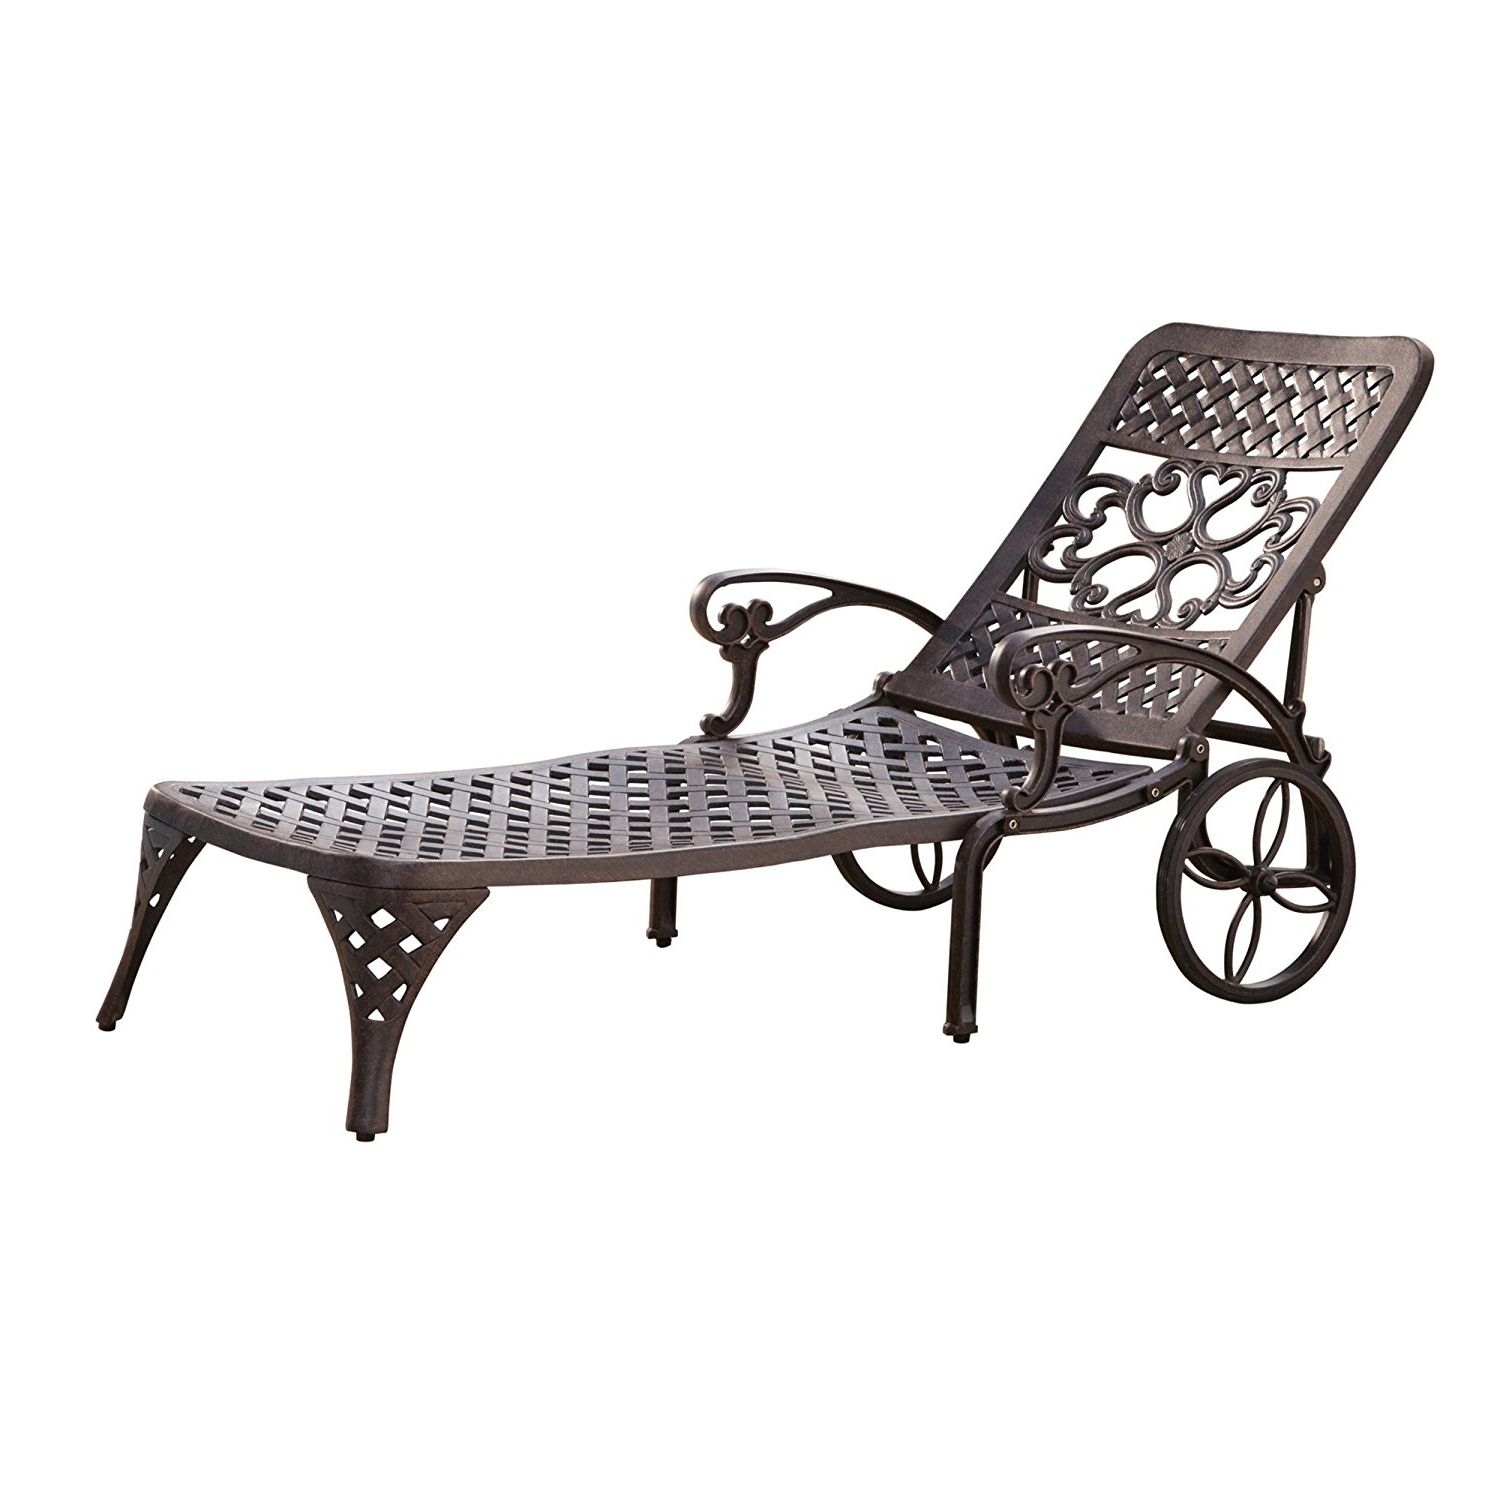 Outdoor Chaise Lounge Chairs In Popular Amazon : Home Styles Biscayne Chaise Lounge Chair, Black (View 12 of 15)